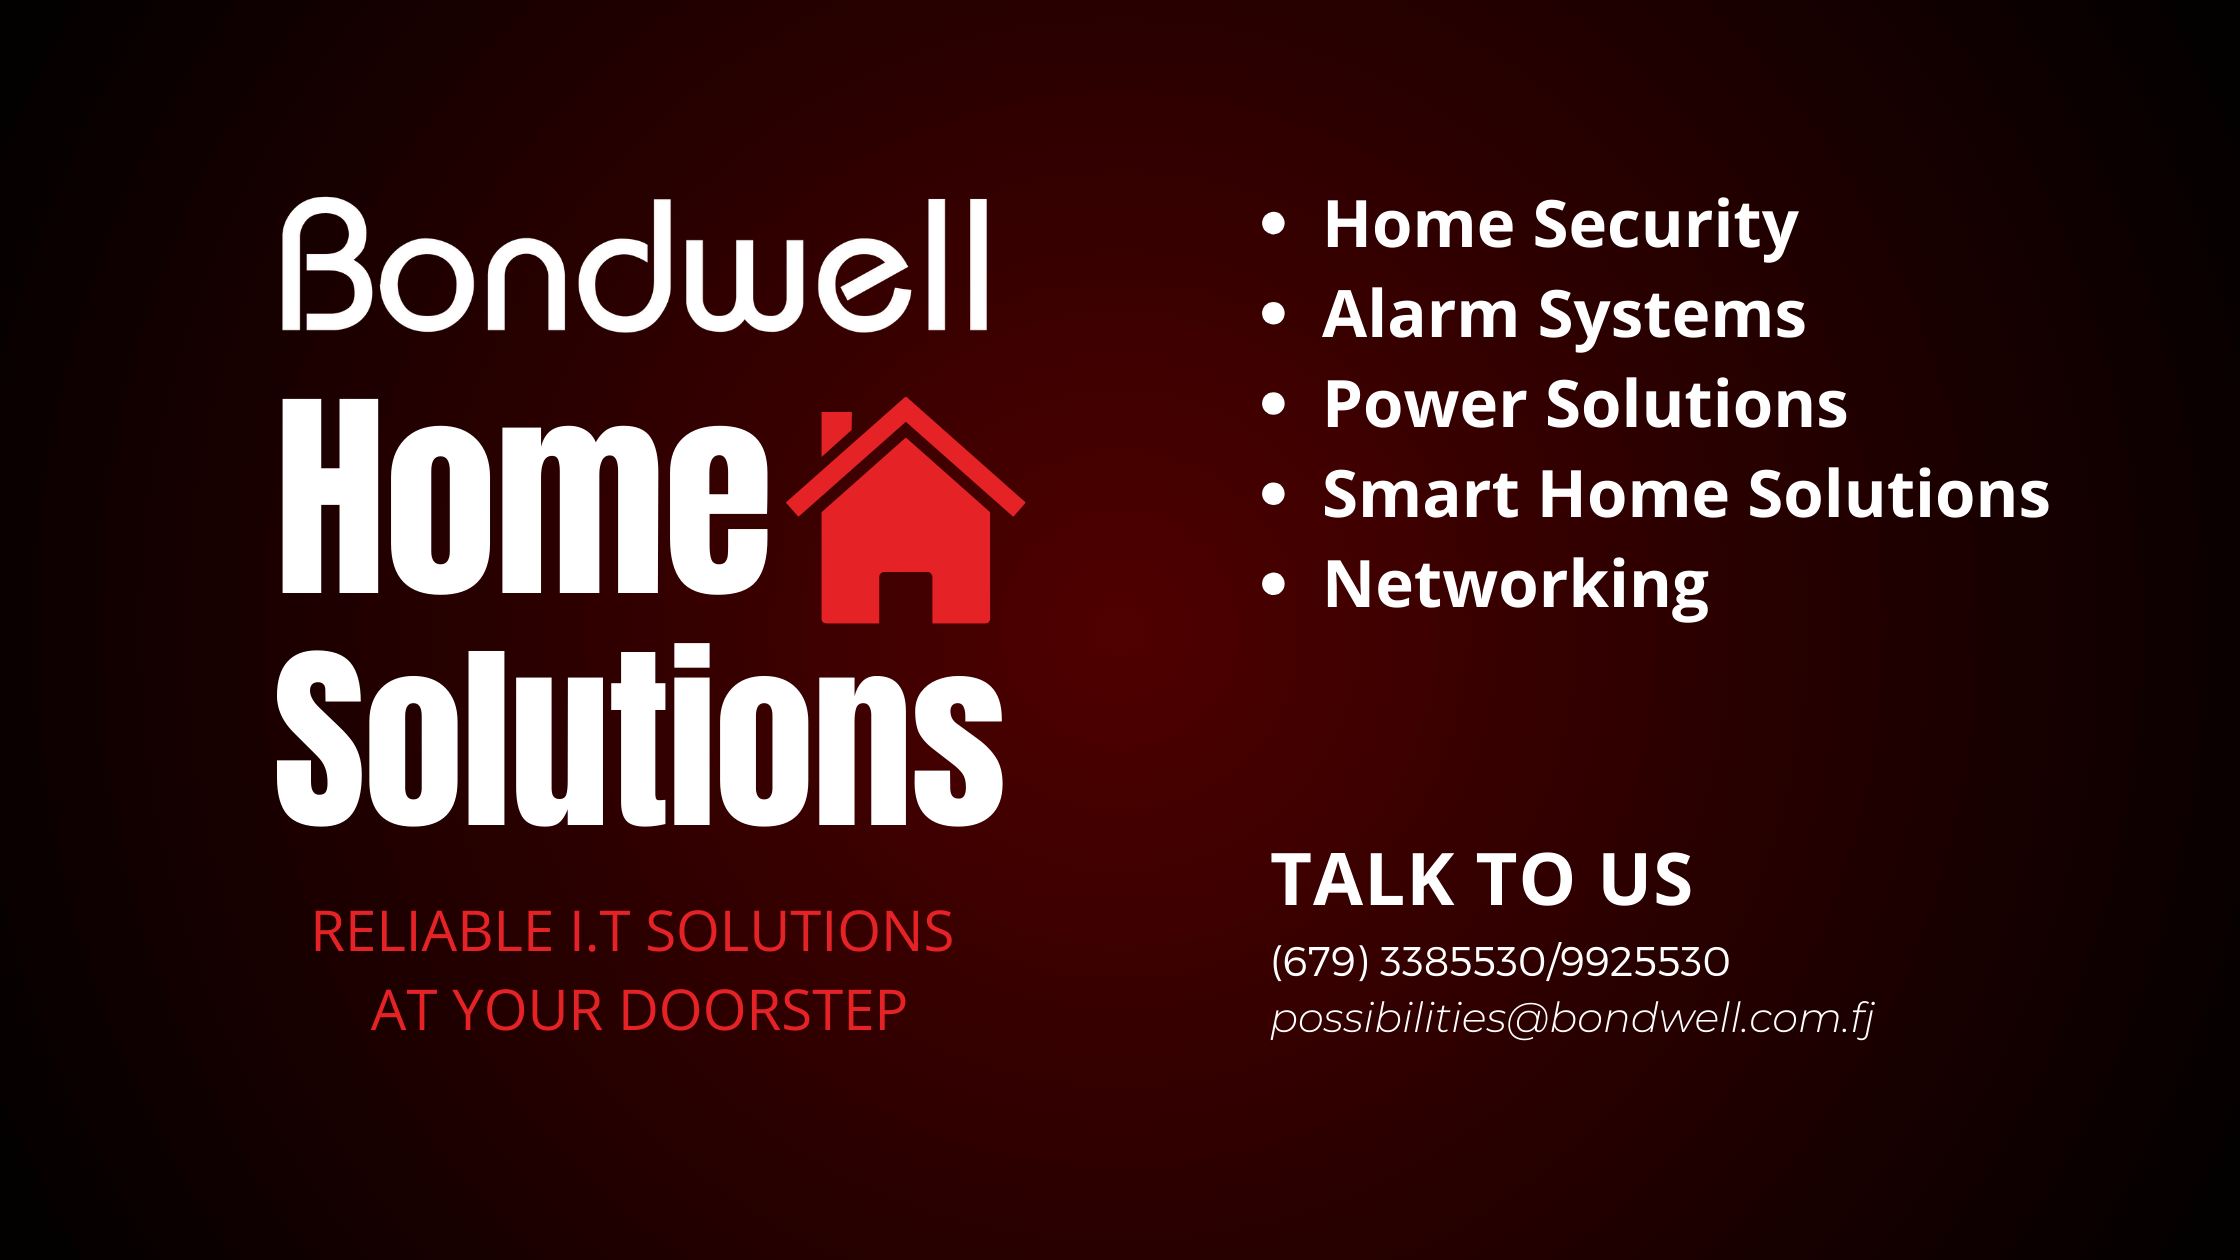 Bondwell Home Solutions - Reliable It Solutions at your Door Step